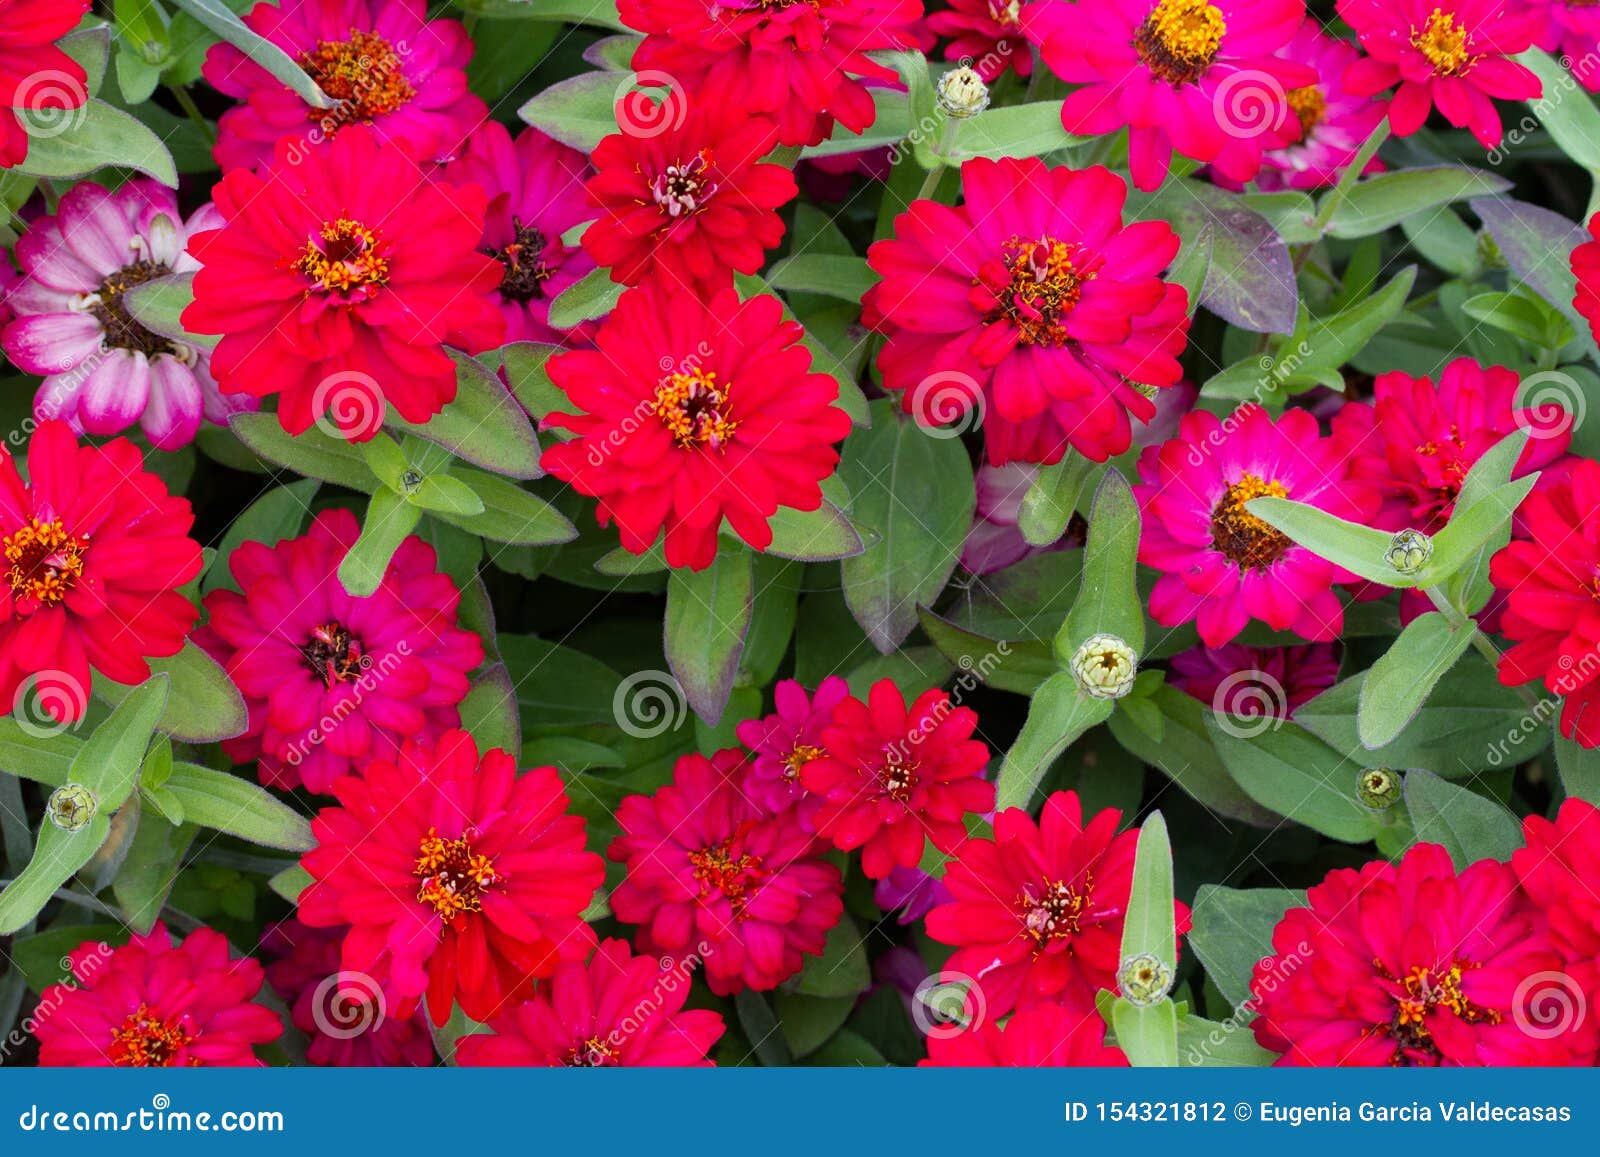 group of red and lila flowes